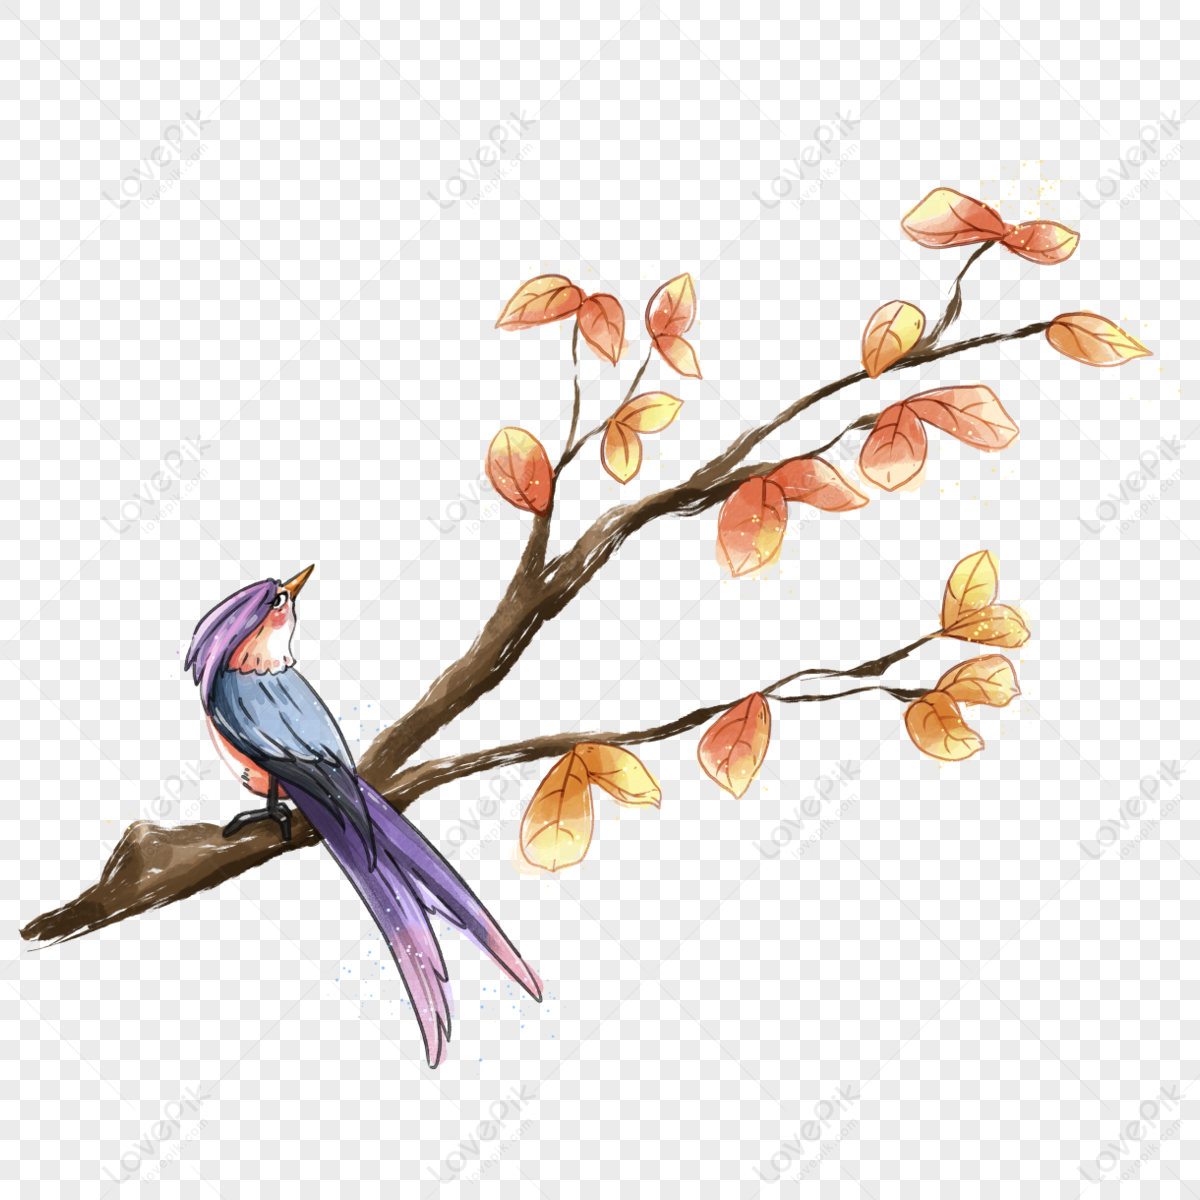 Chinese Style Classical Hand Drawn Flowers And Birds Vector, Chinese Style,  Chinese Painting, Classical Style PNG White Transparent And Clipart Image  For Free Download - Lovepik | 611752642